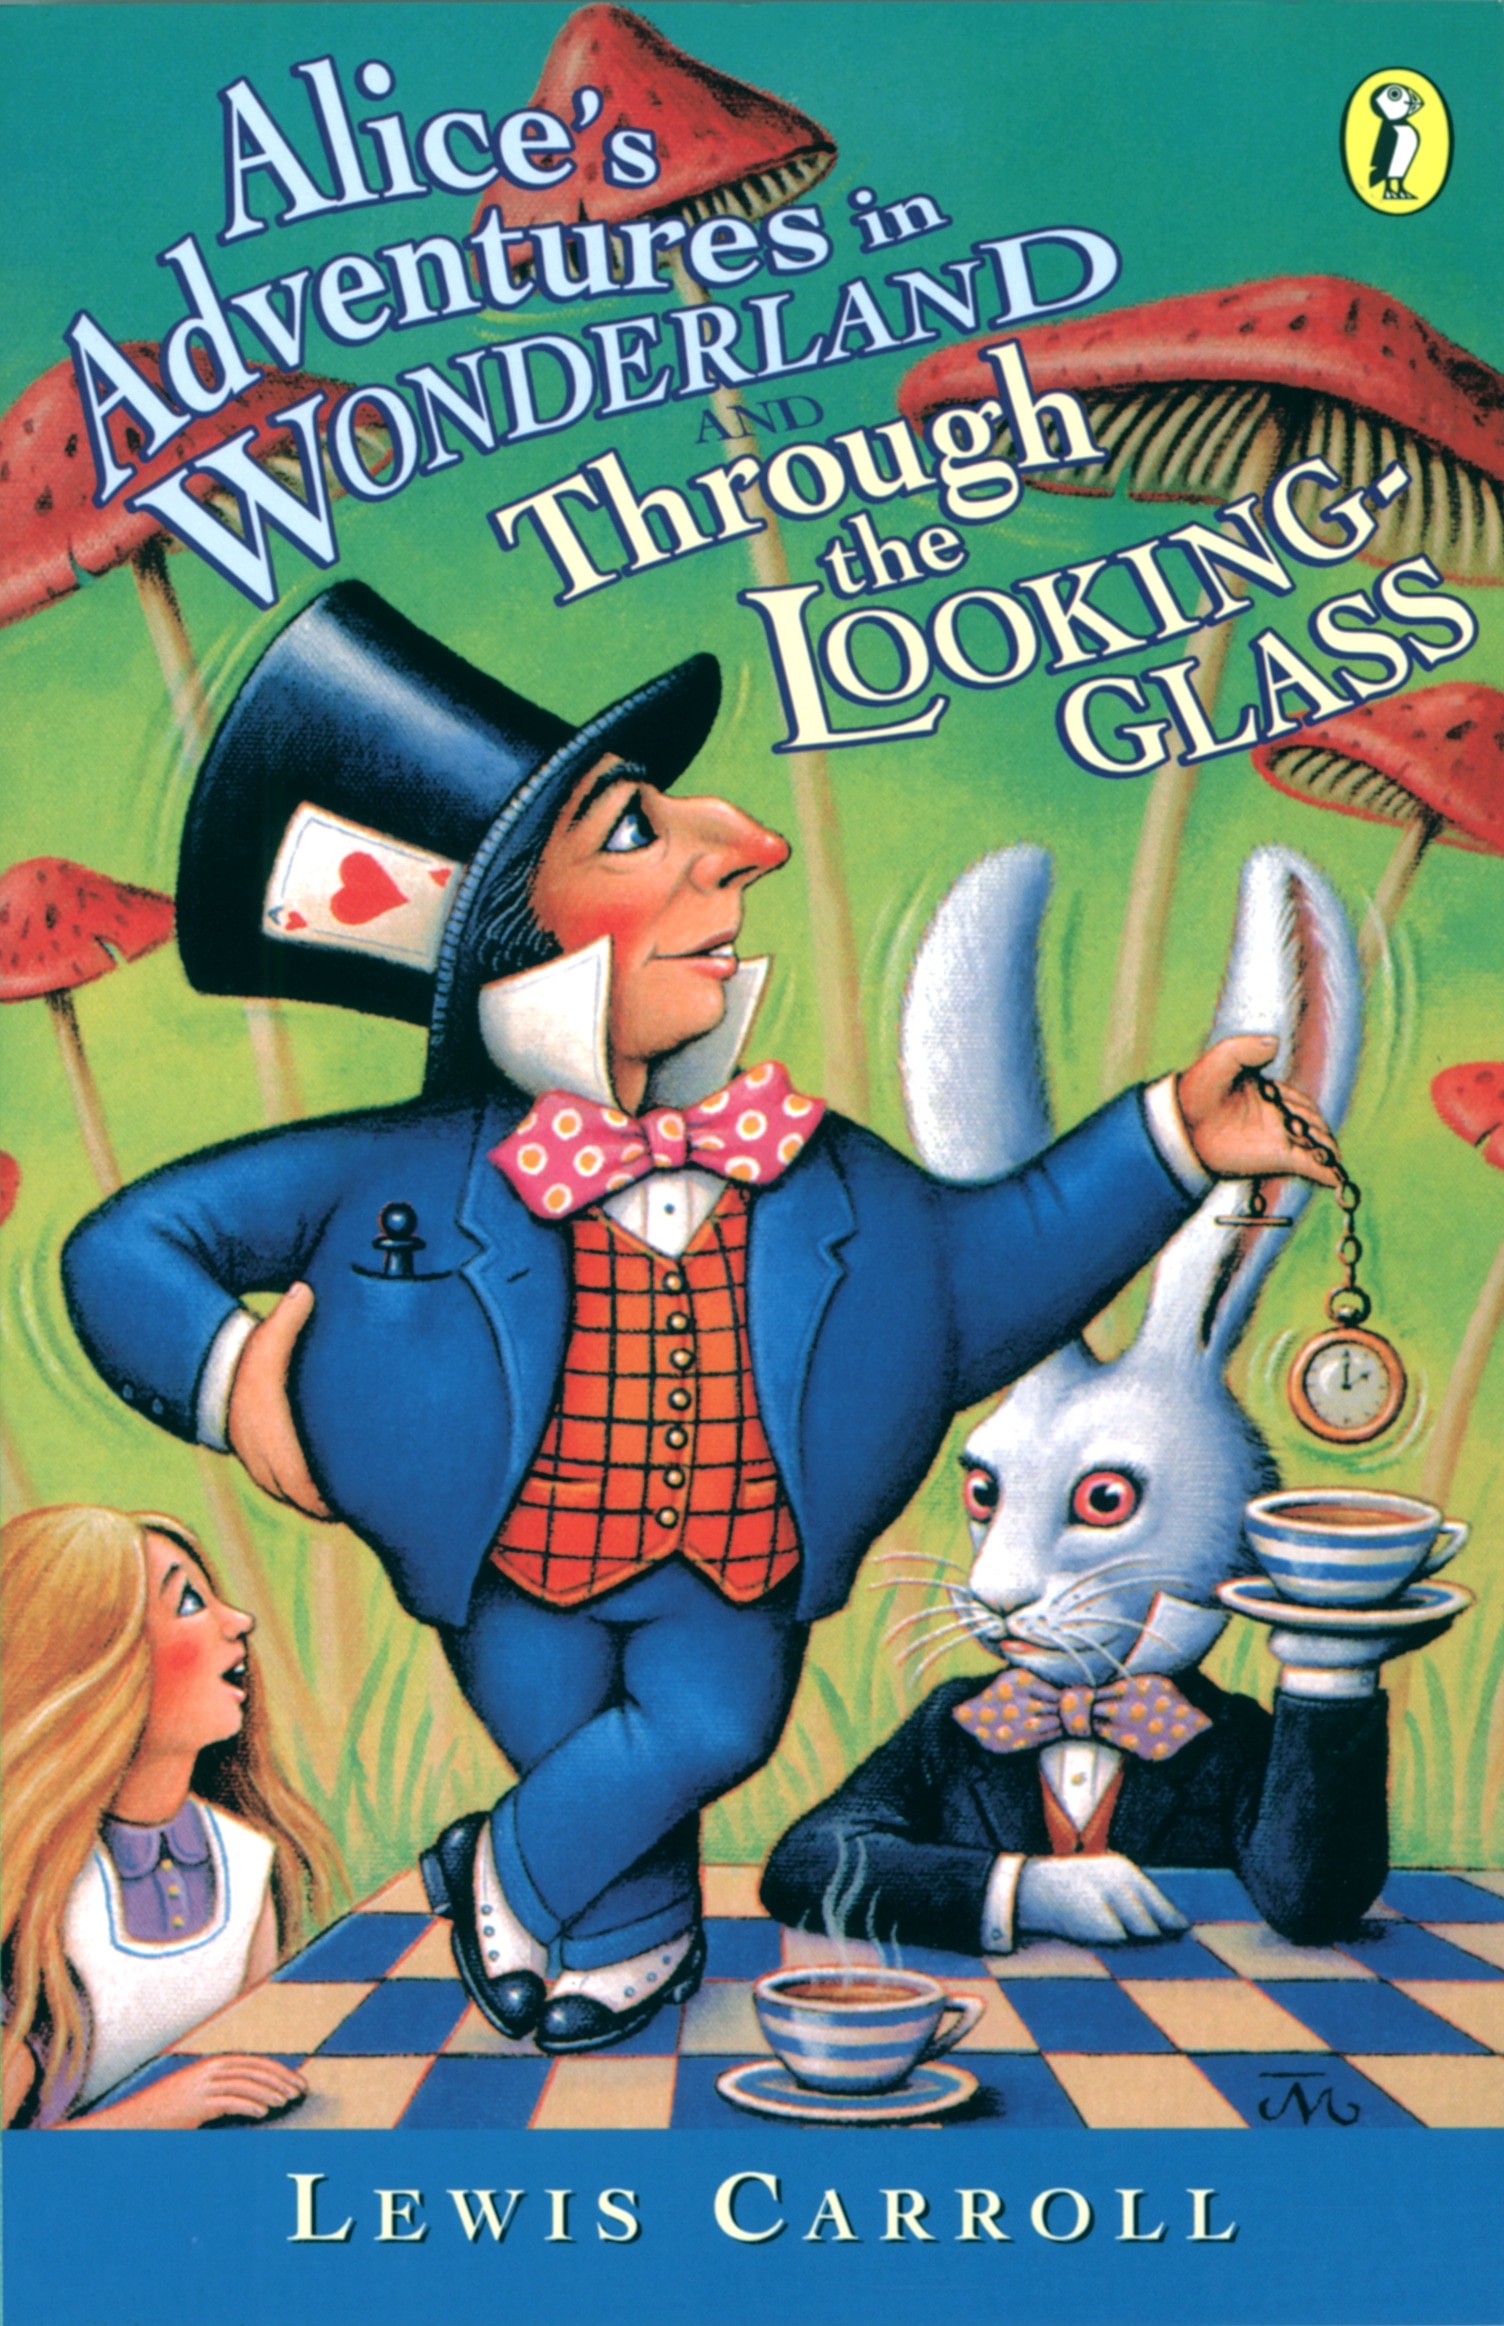 Book “Alice's Adventures in Wonderland & Through the Looking Glass” by Lewis Carroll — October 30, 1997